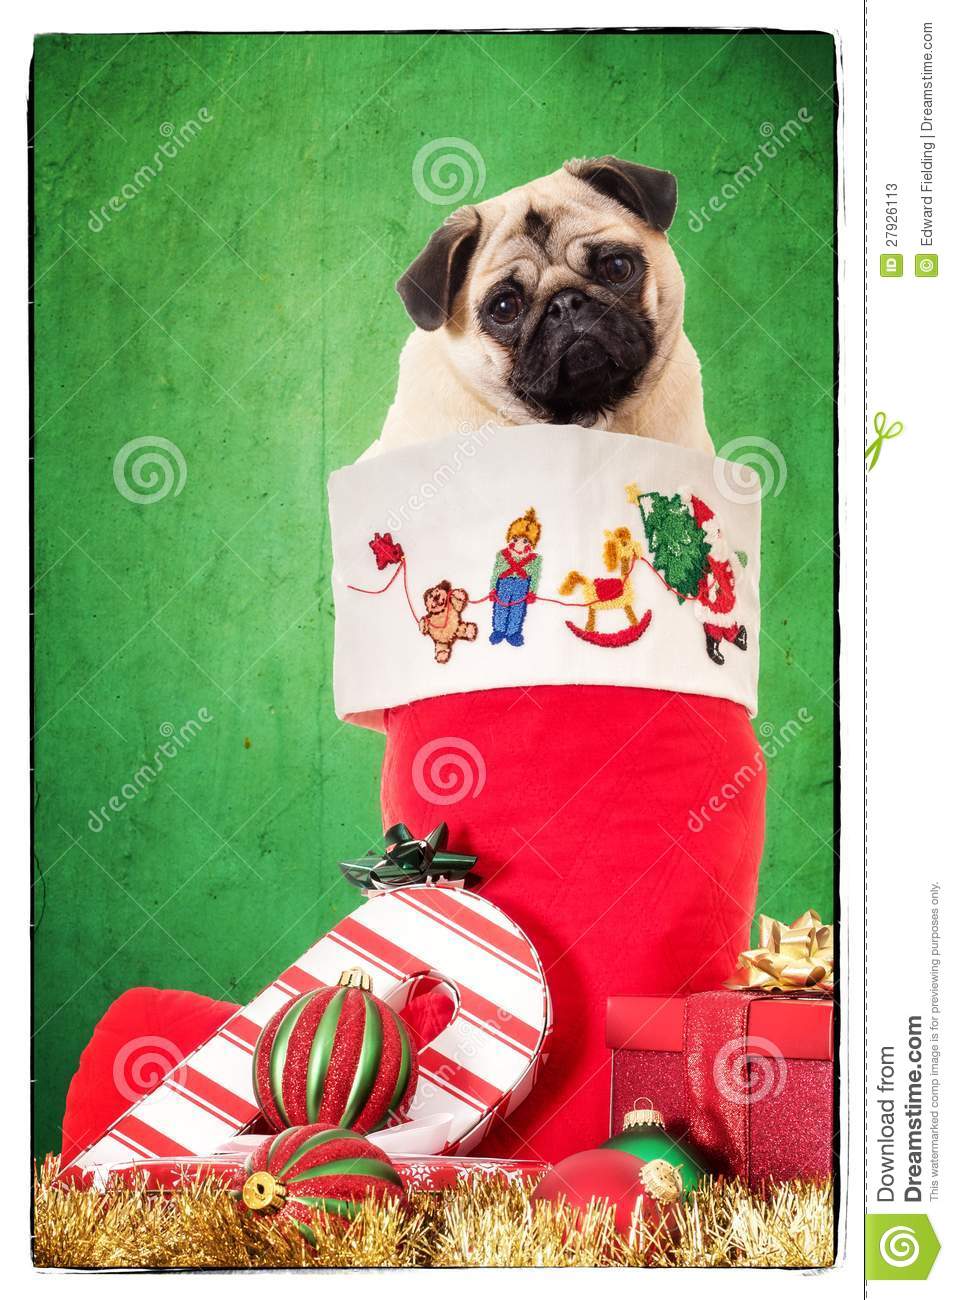 Puppy In Christmas Stocking Stock Photos   Image  27926113